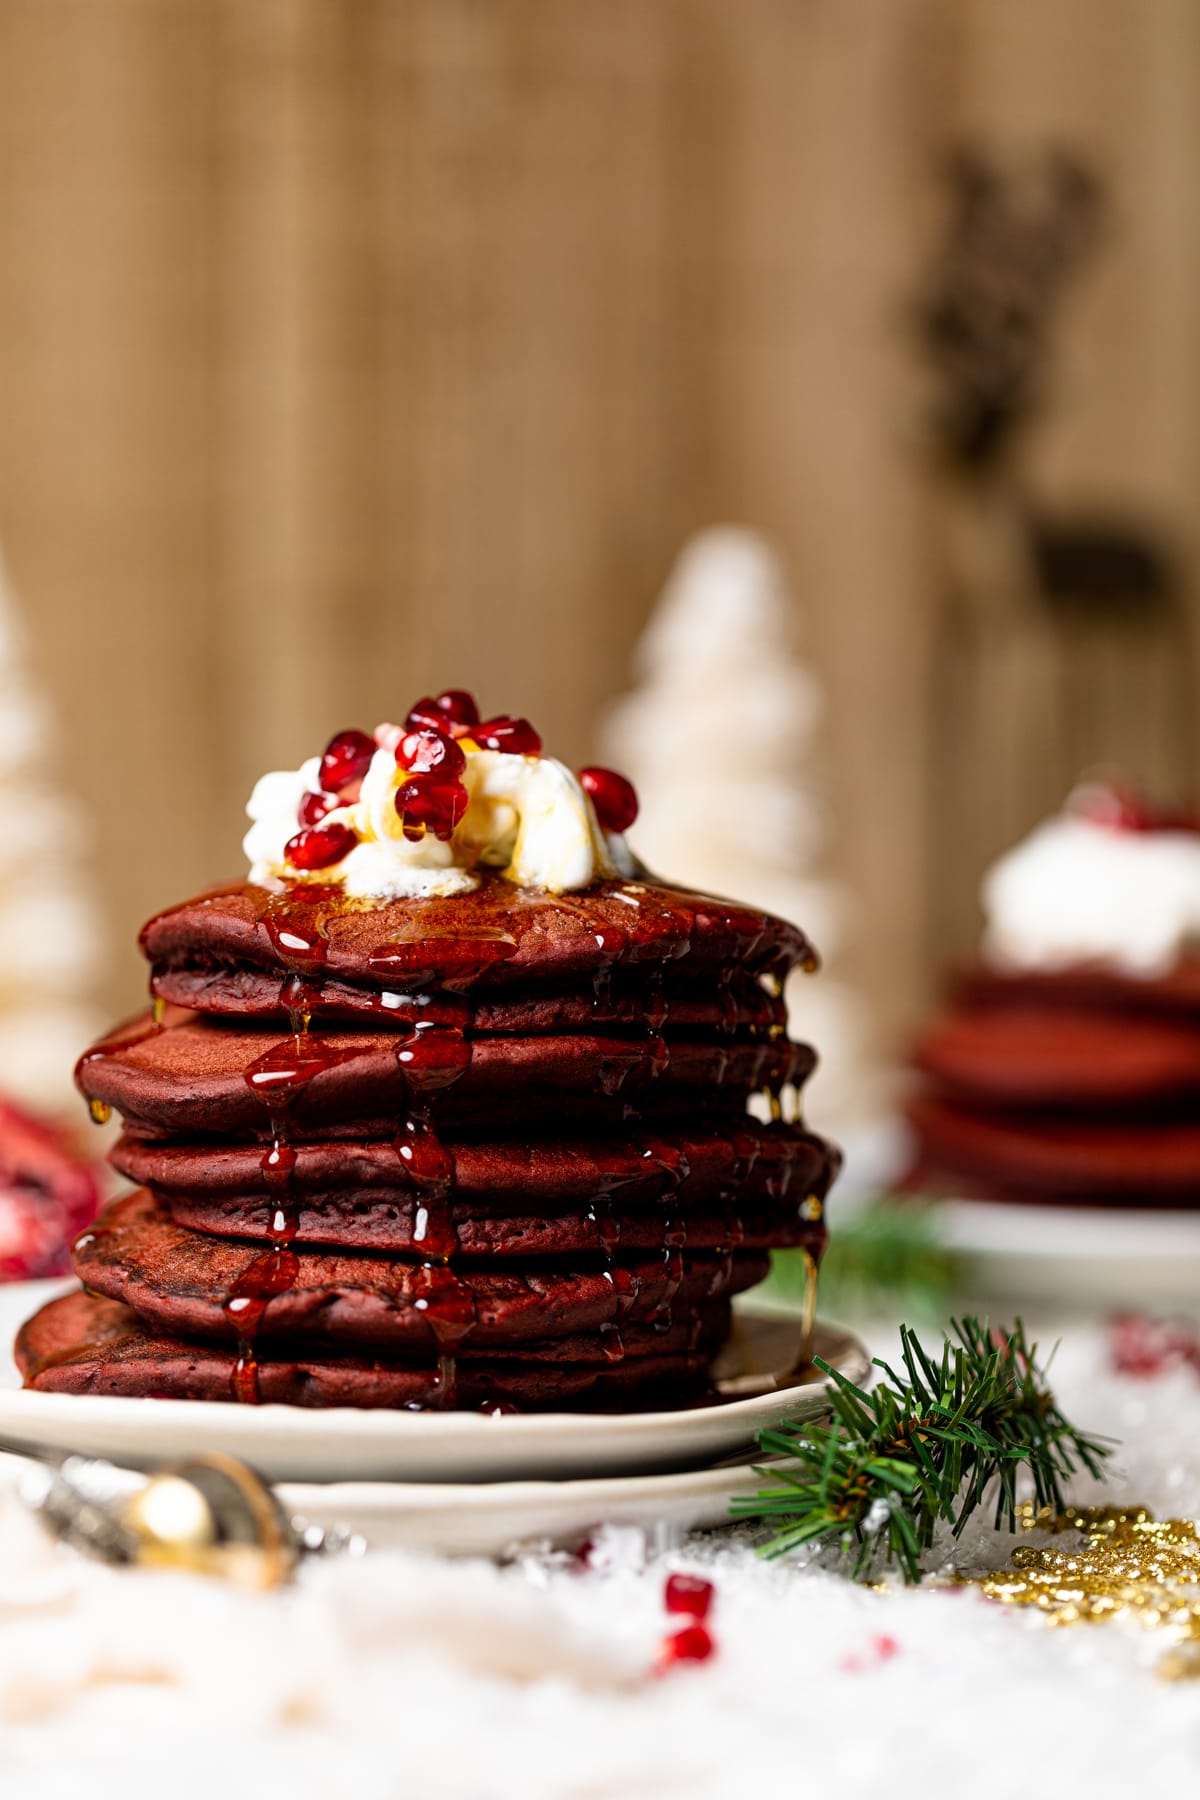 Stack of Fluffy Red Velvet Pancakes topped with whipped cream, syrup, and pomegranate seeds